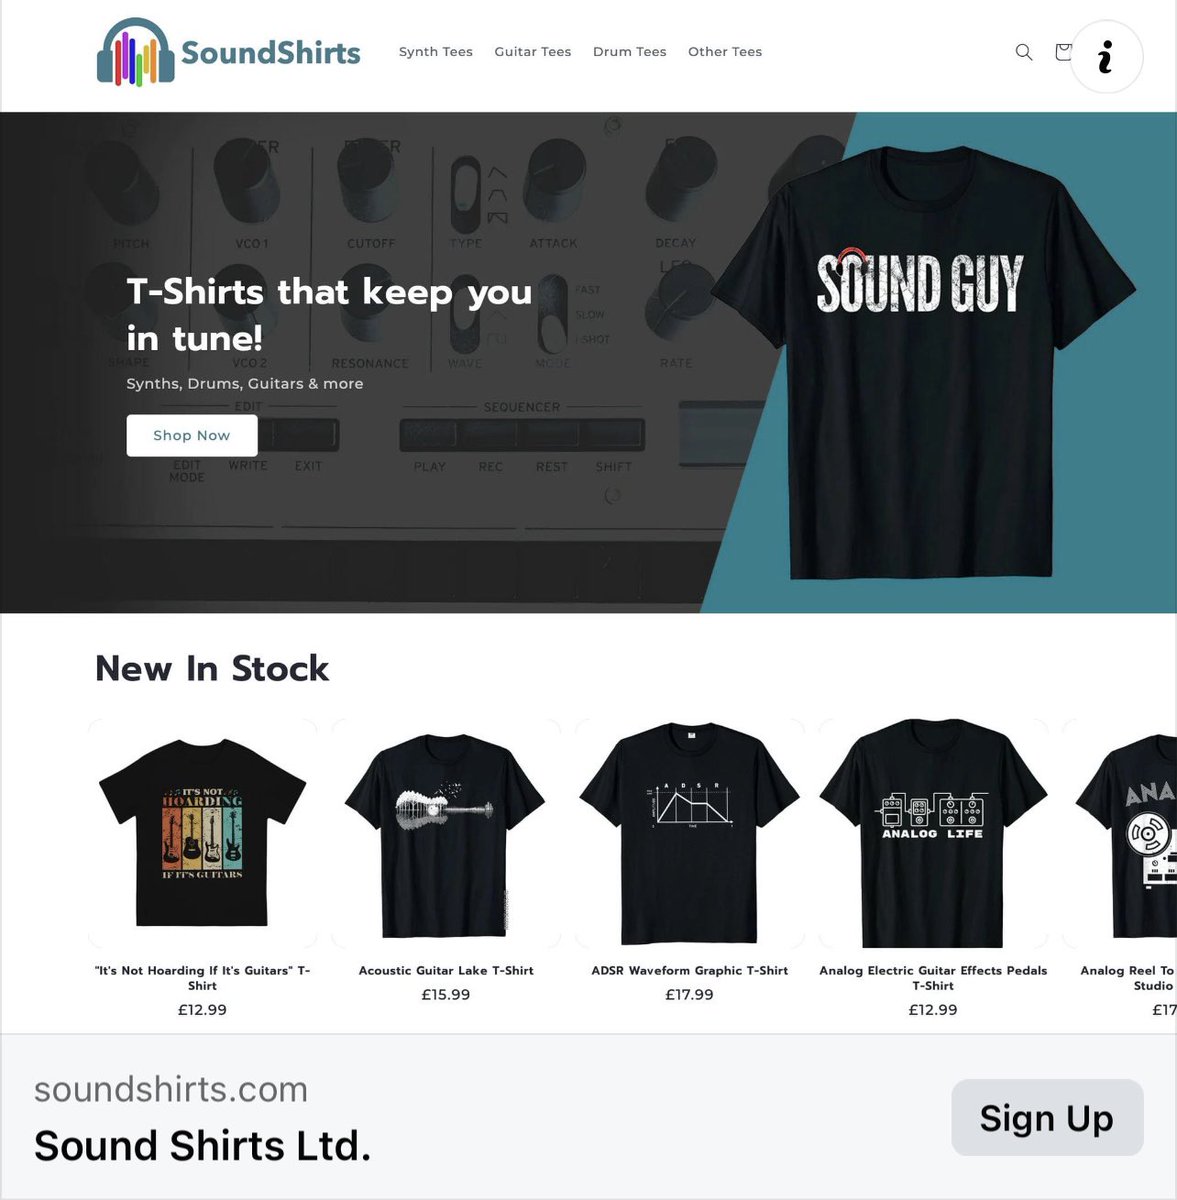 Three weeks to get from an idea to here… going live in just over a week. Sign up to stay in tune at SoundShirts.com @soundshirts